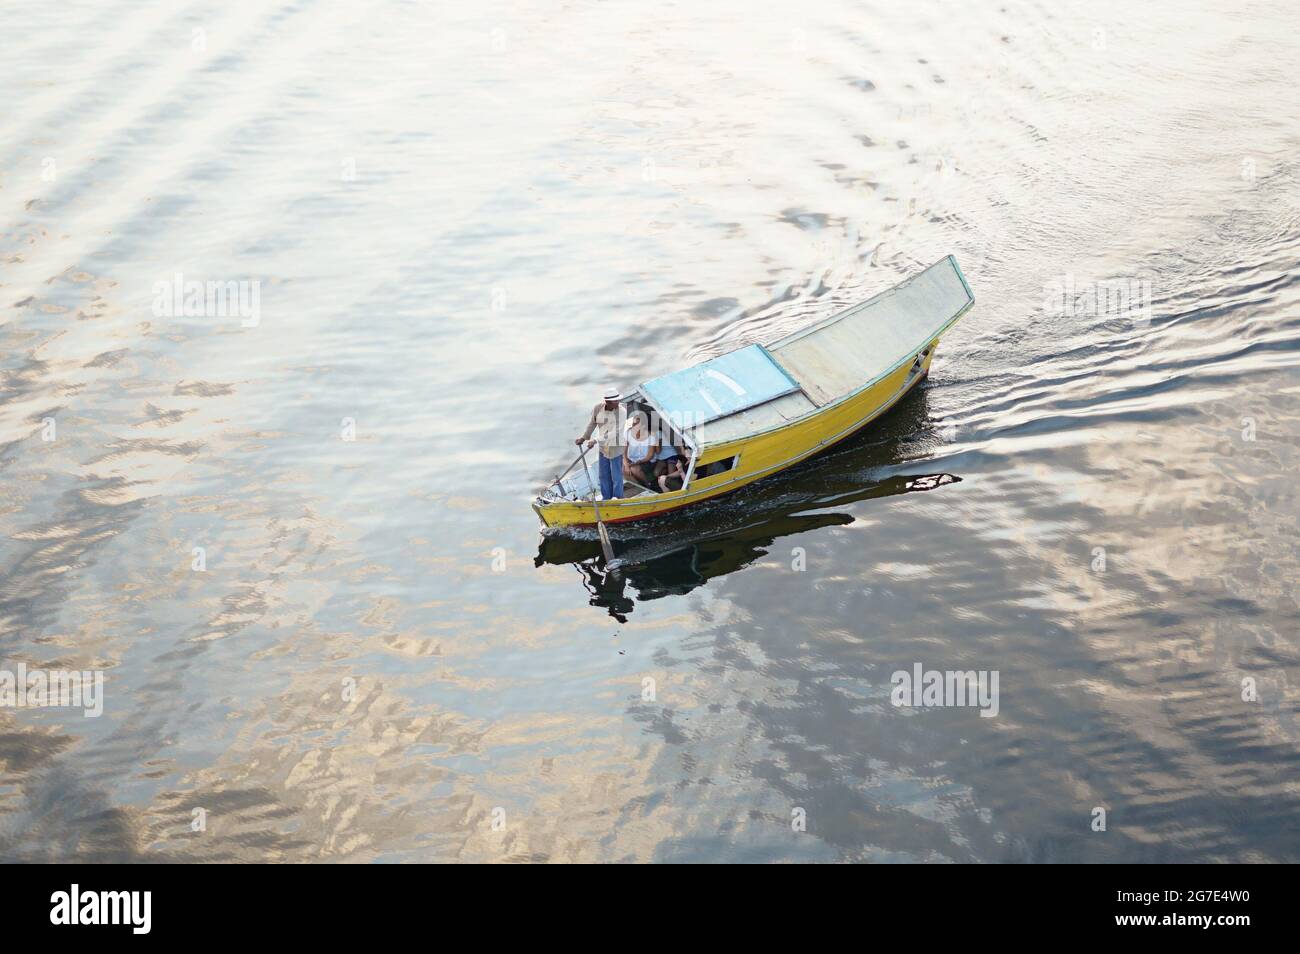 'Life is like a river, sometimes coming to us gently and sometimes rapids out of nowhere.' Stock Photo